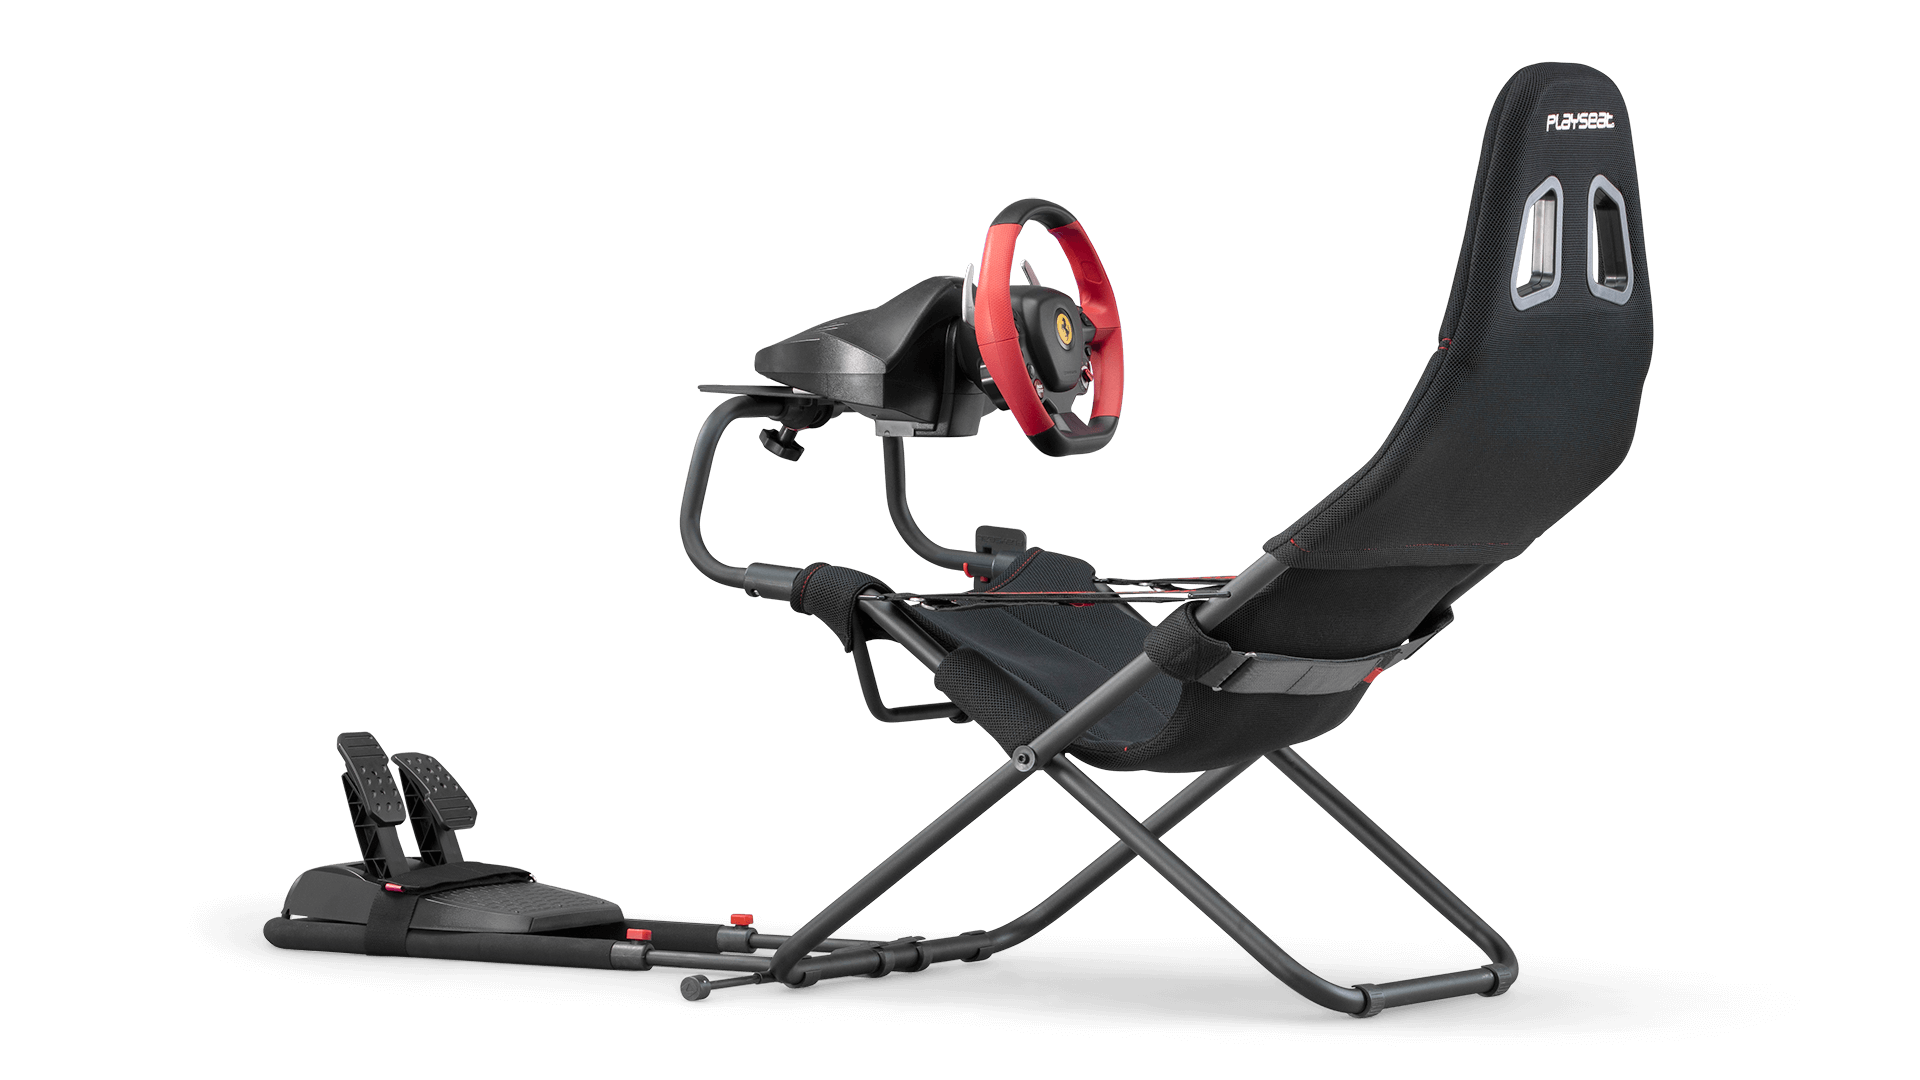 playseat-challenge-black-actifit-racing-seat-back-angle-view-thrustmaster-1920x1080-1.png